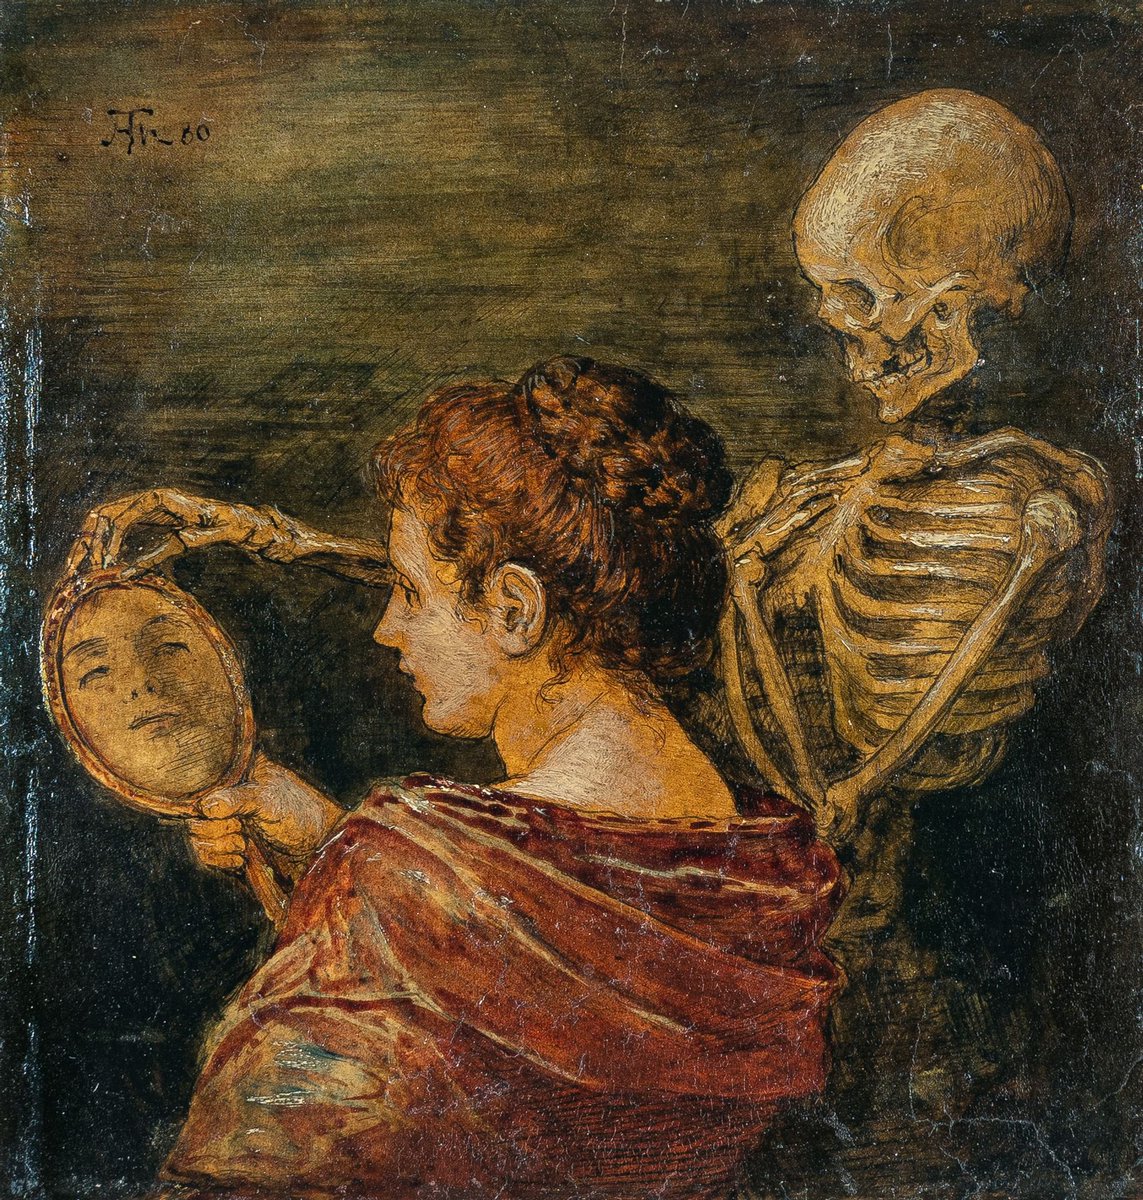 Woman with a Mirror and Death by Hans Thoma, 1880